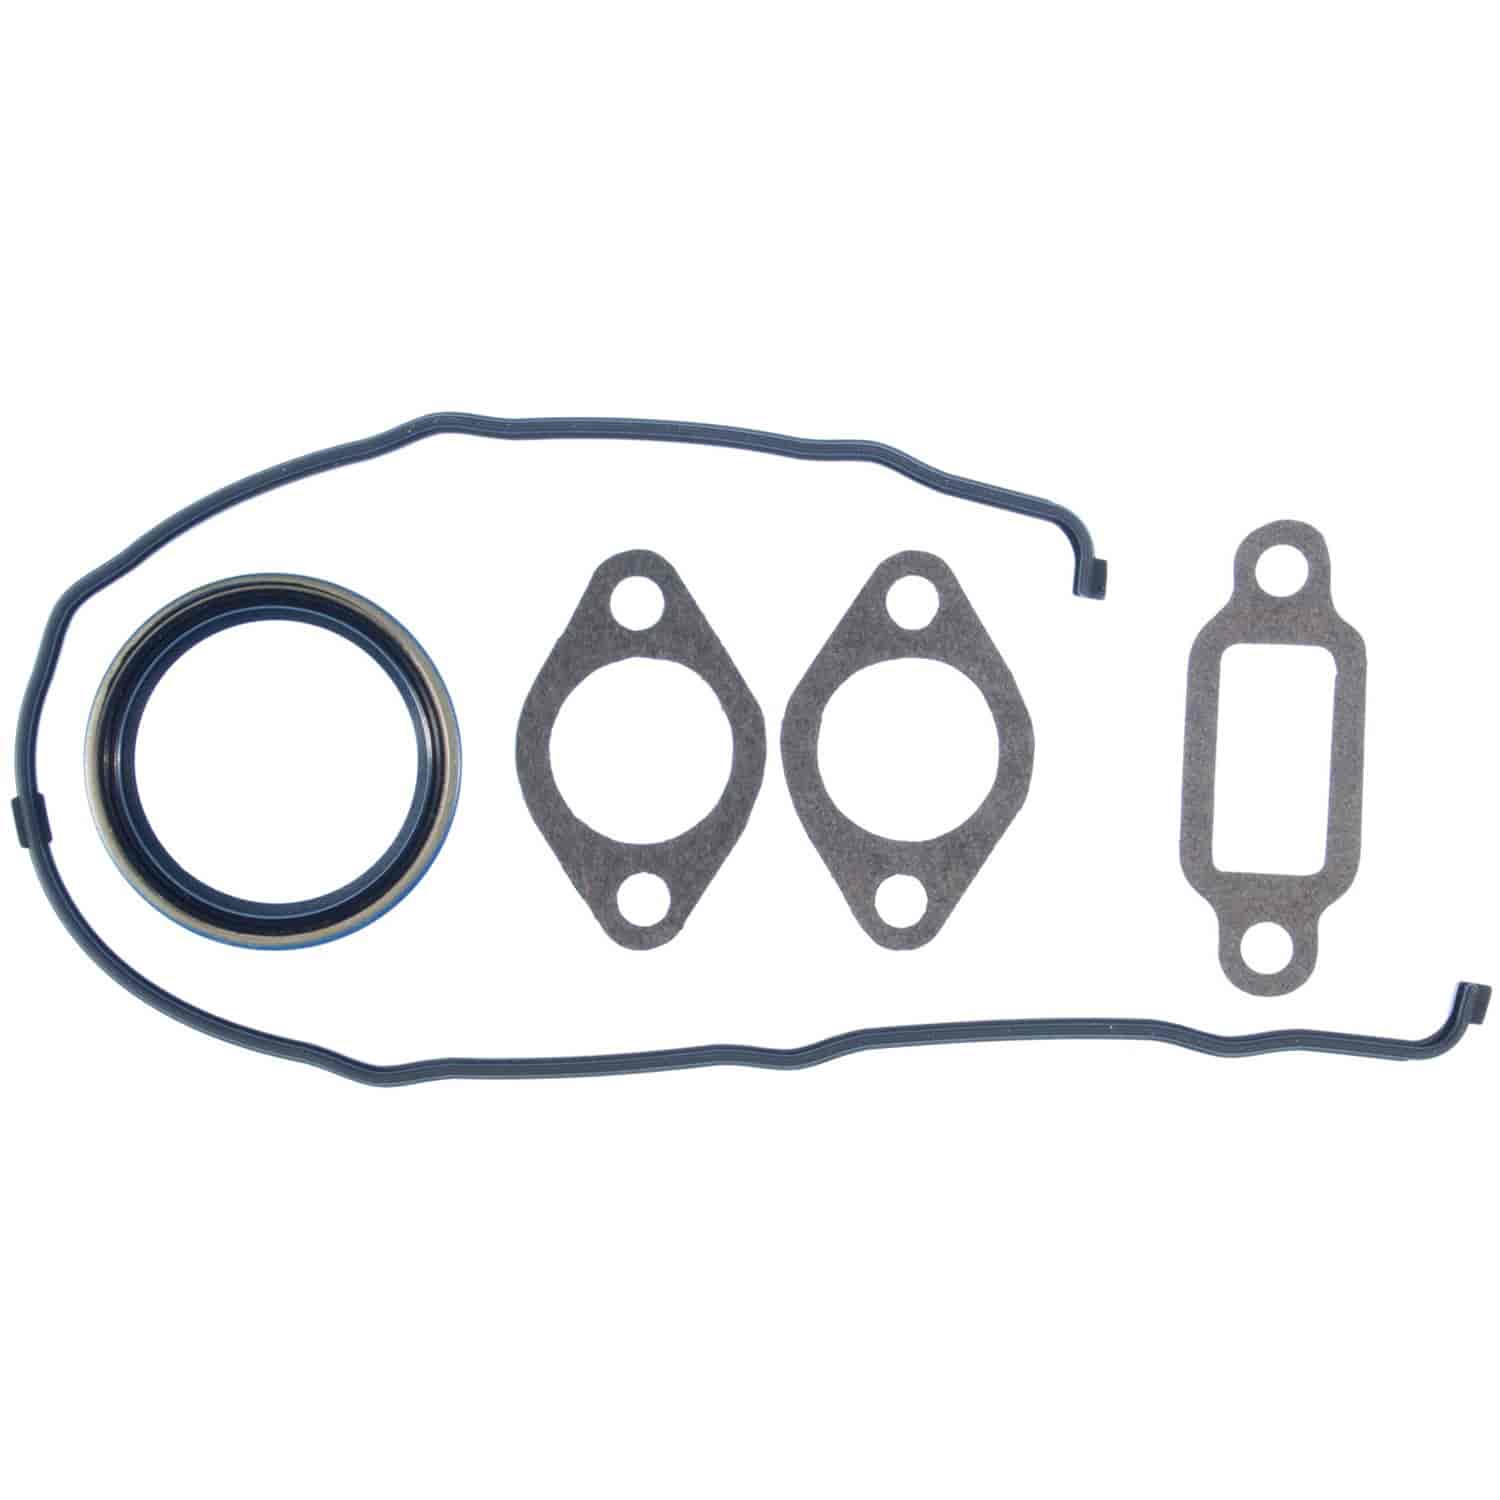 Timing Cover Gasket Set Big Block Chevy 1996-2000